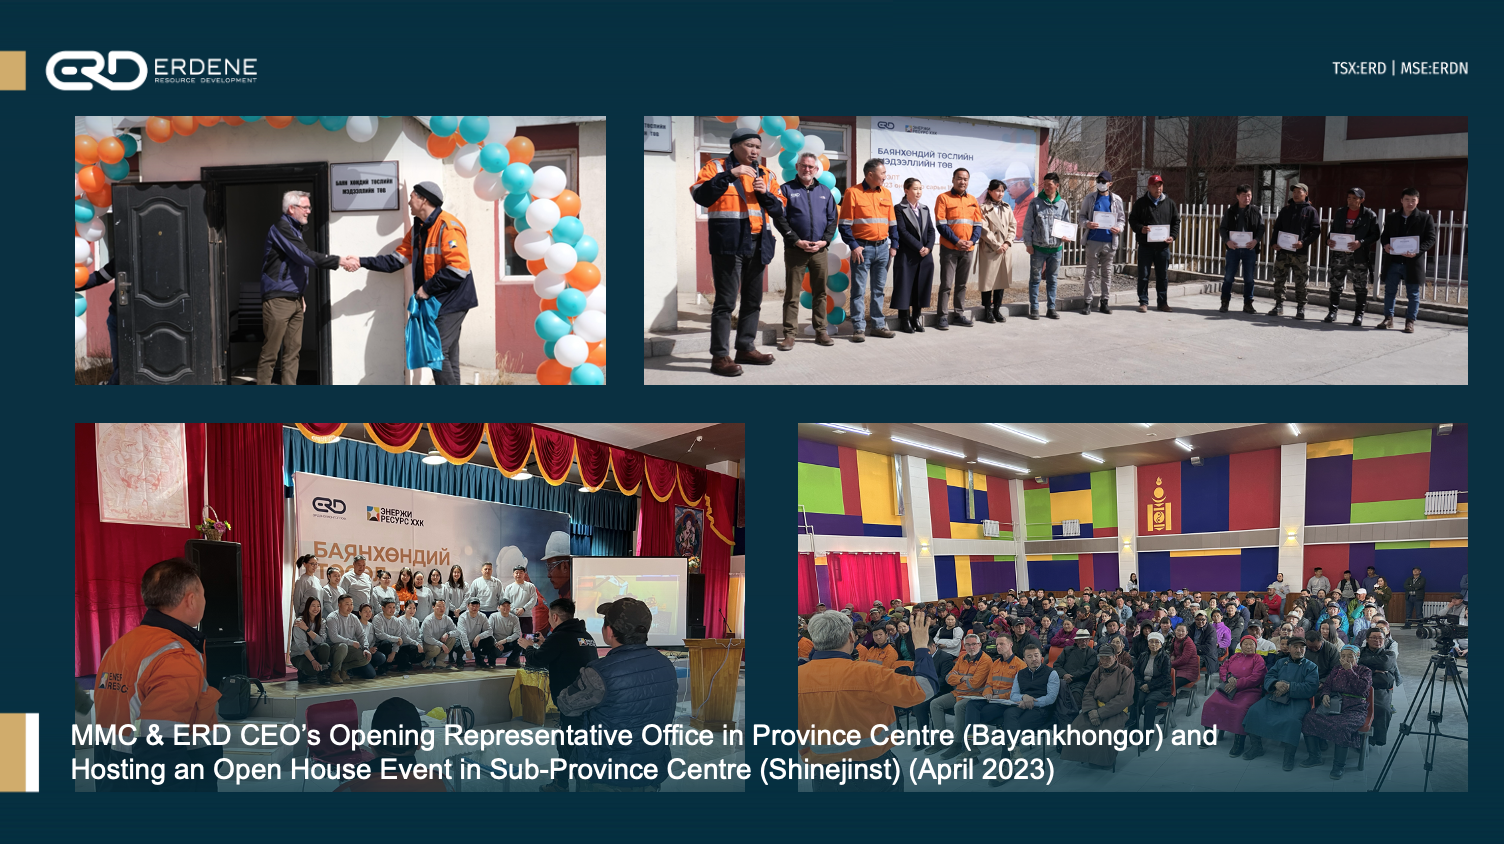 MMC & ERD CEO's Opening Representative Office in Province Centre (Bayankhongor) and Hosting an Open House Event in Sub-Province Centre (Shinejinst)